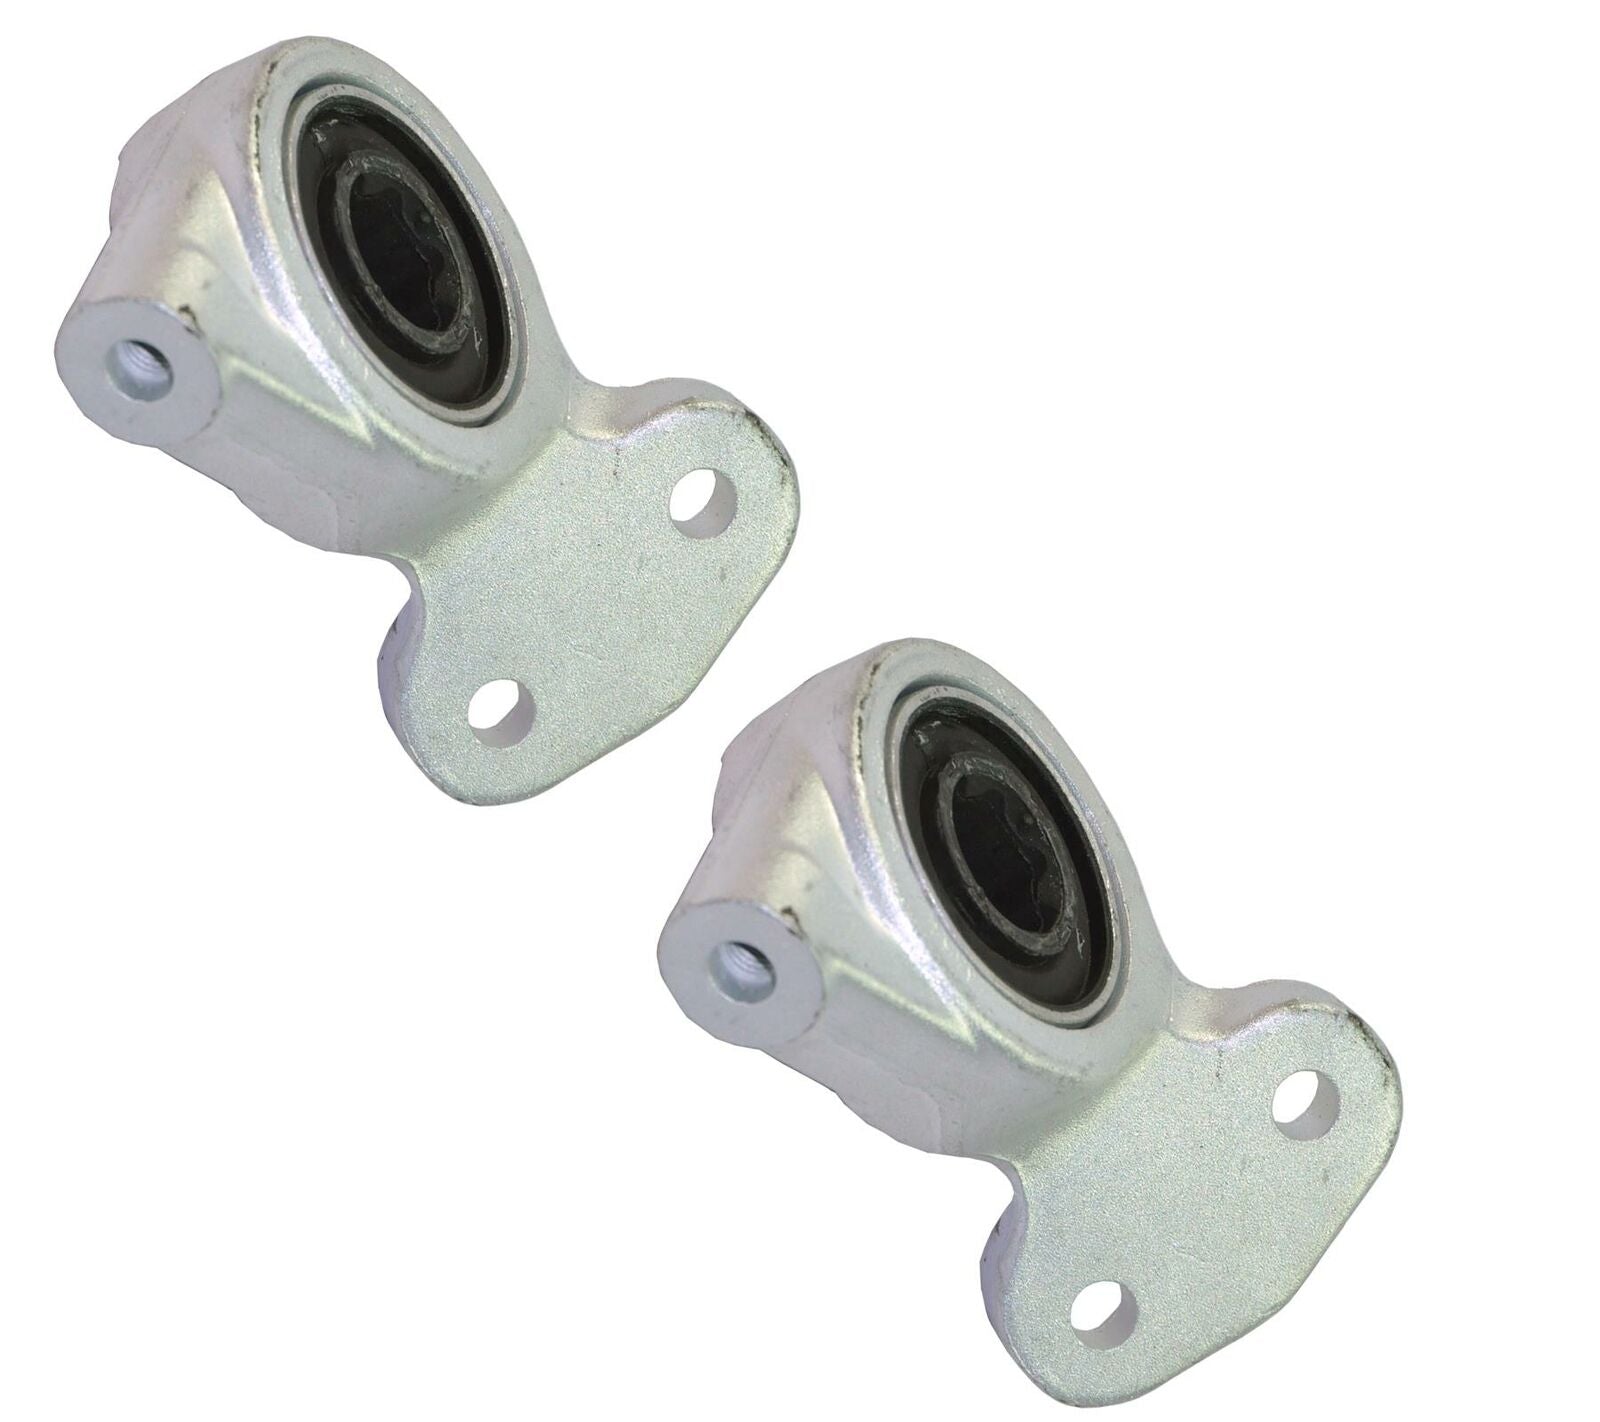 Pair Of Front Left & Right Bmw 3 Series E46 M3 Trailing Control Arm Bushes 31126757623, 31126757624